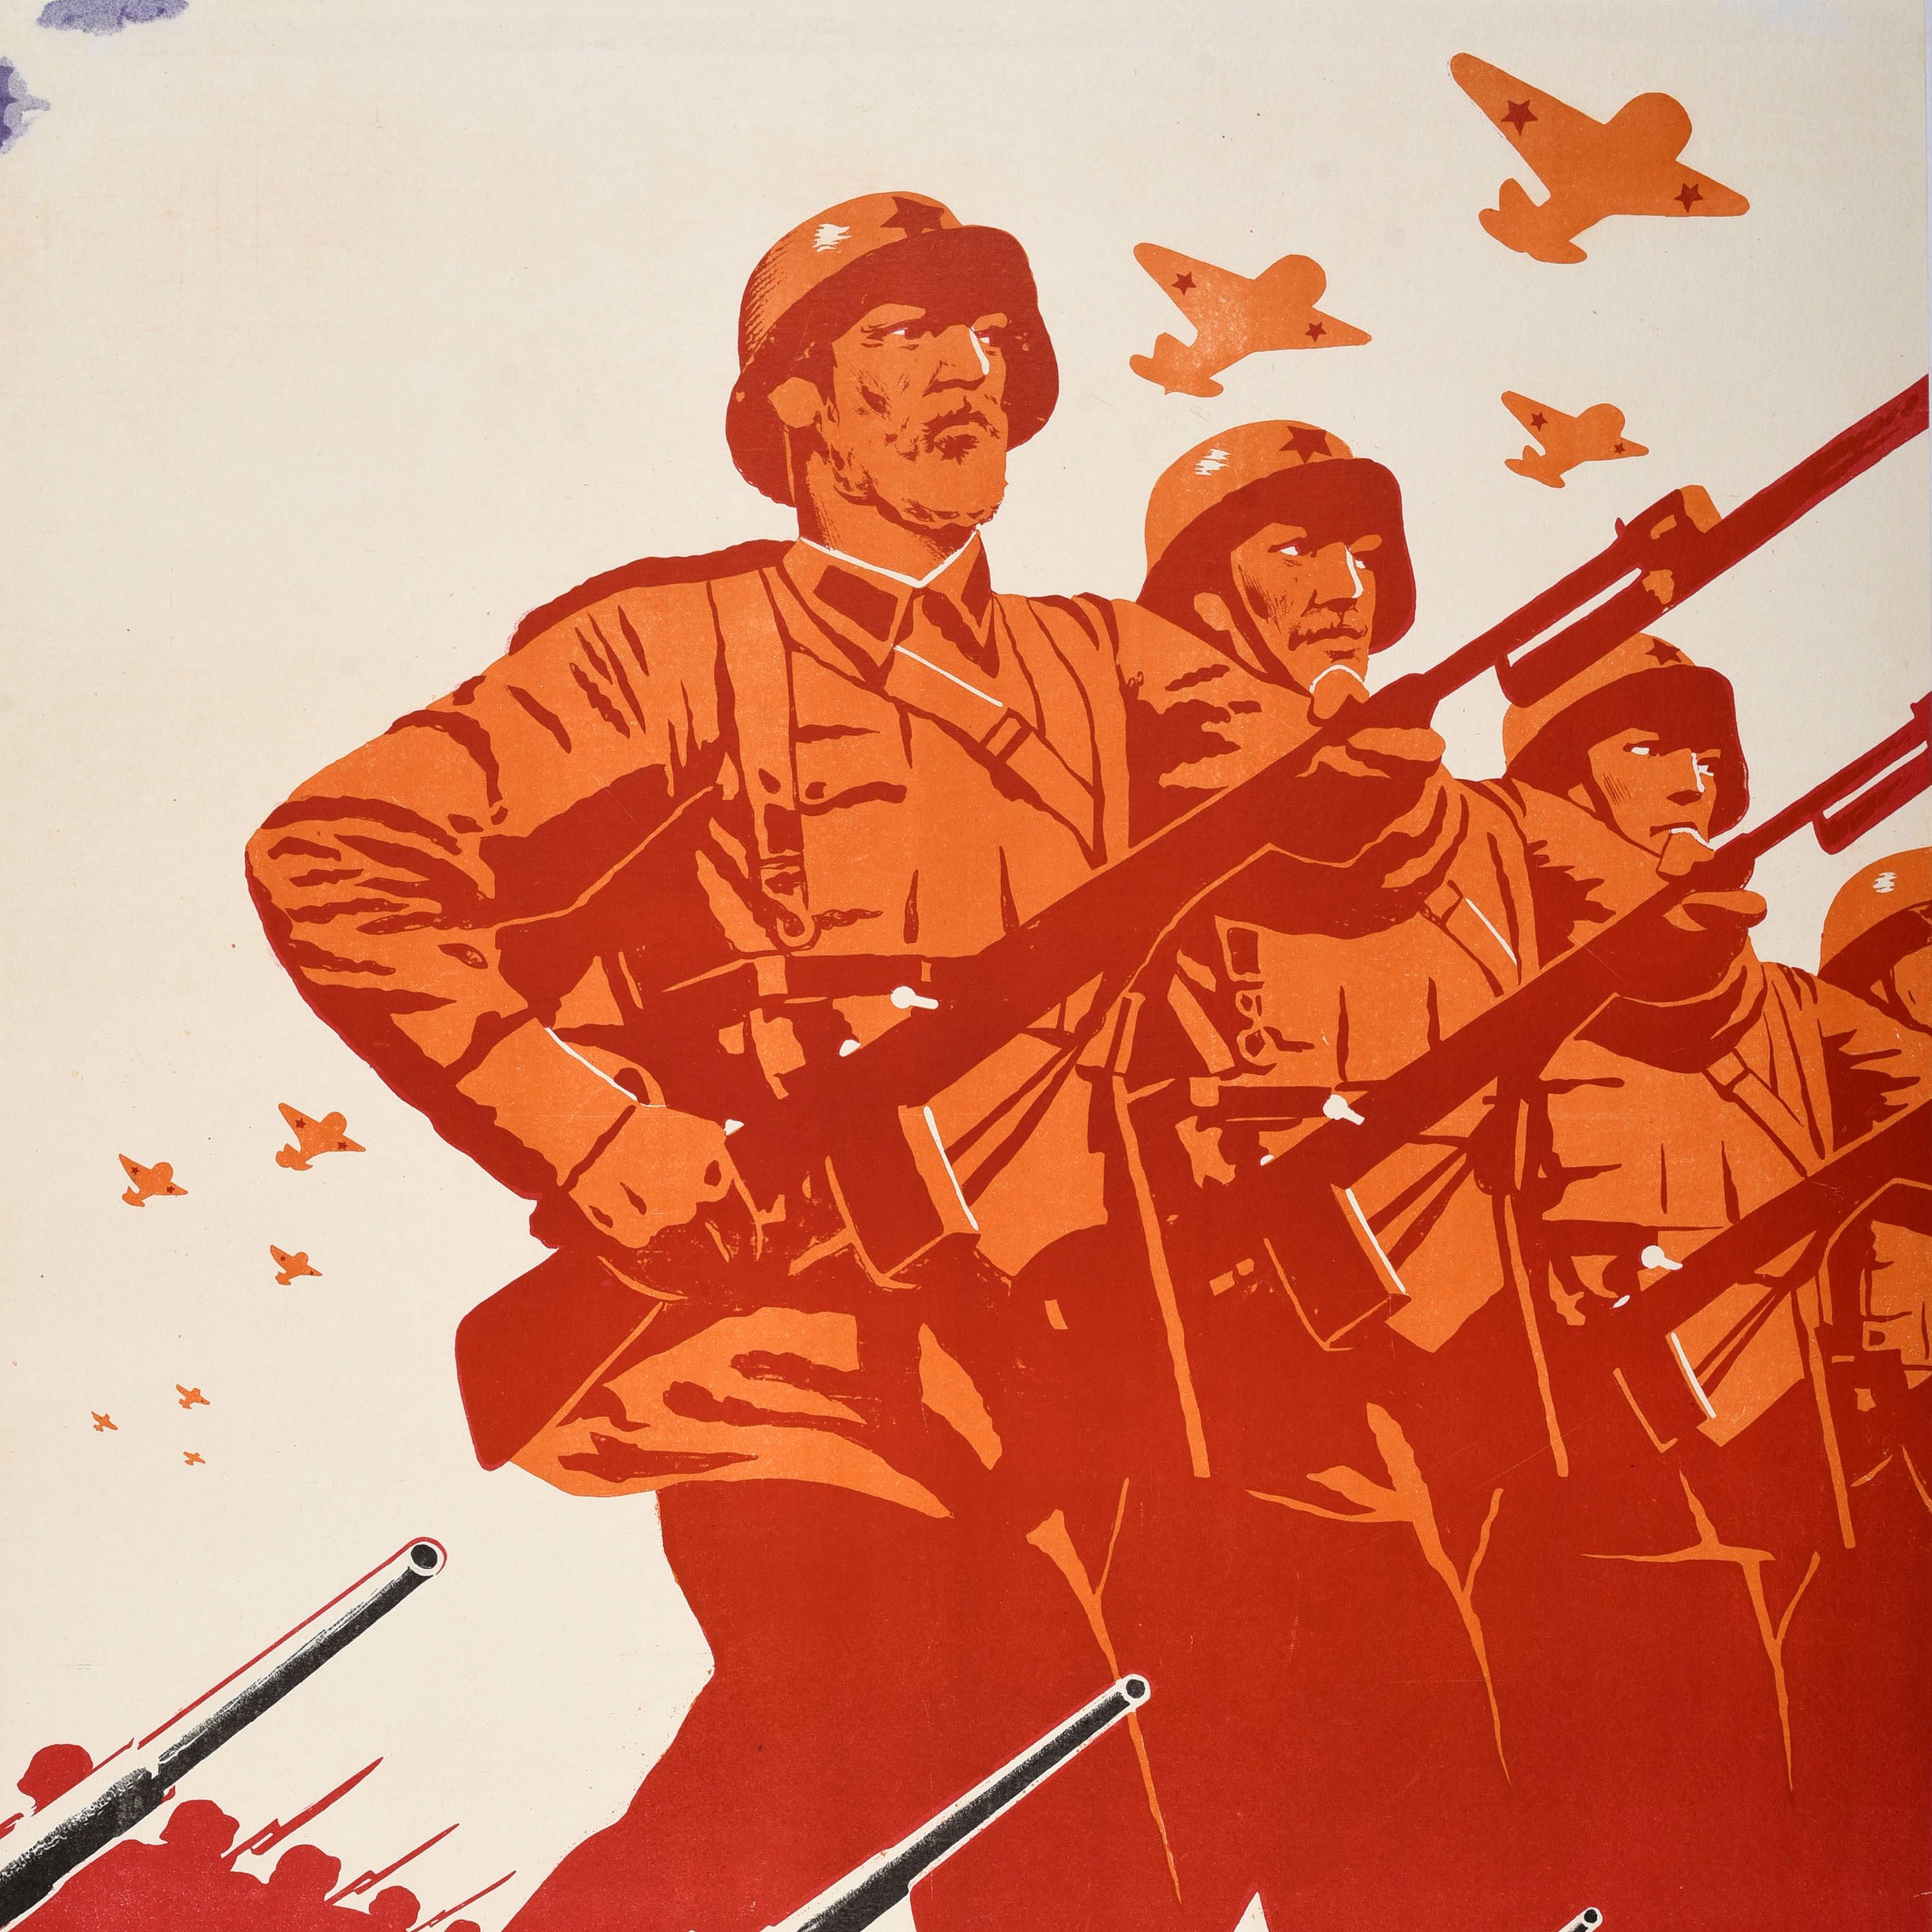 Original vintage Soviet World War Two propaganda poster - For the Defence of the Motherland / На Защиту Родины - featuring a dynamic design depicting Red Army soldiers marching in line in uniform with red USSR stars on their helmets and carrying